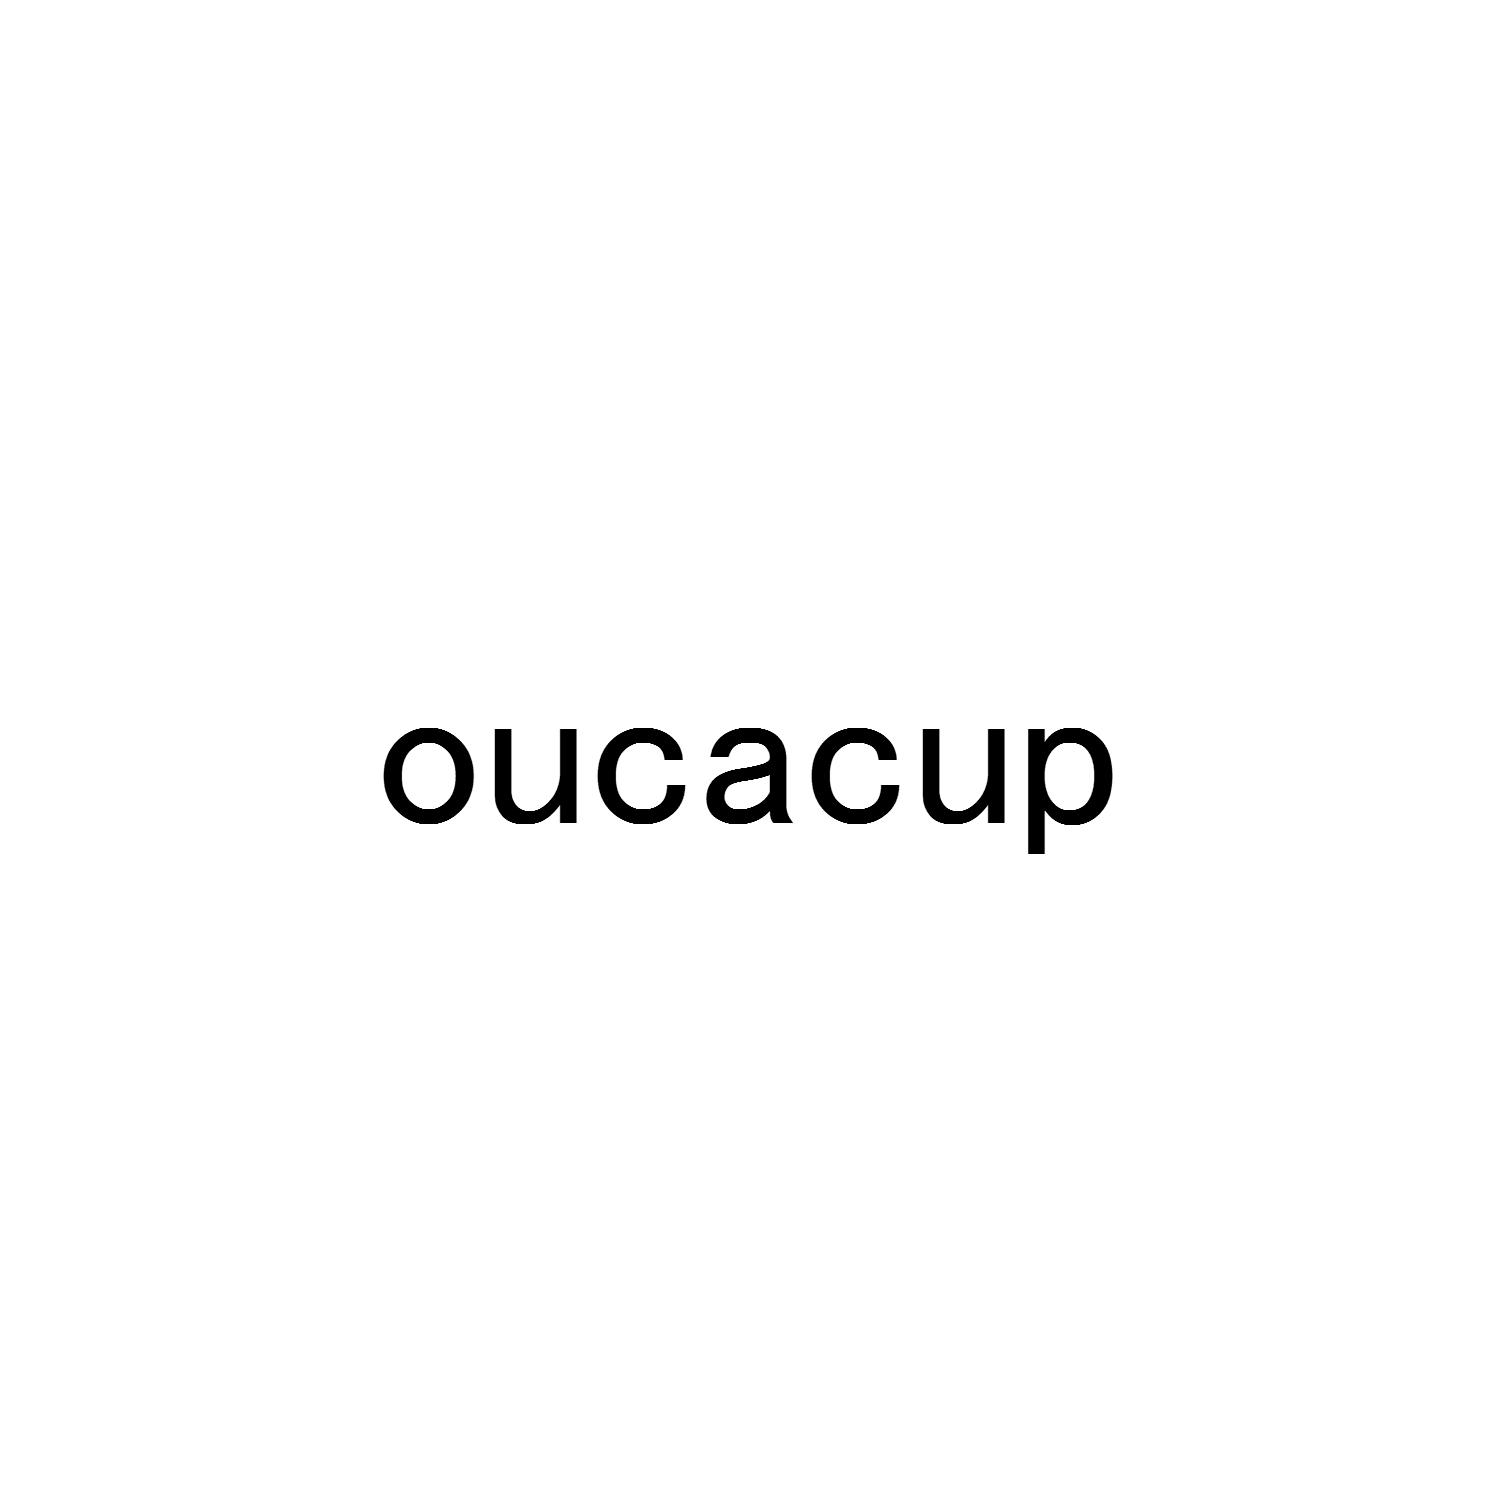 oucacup